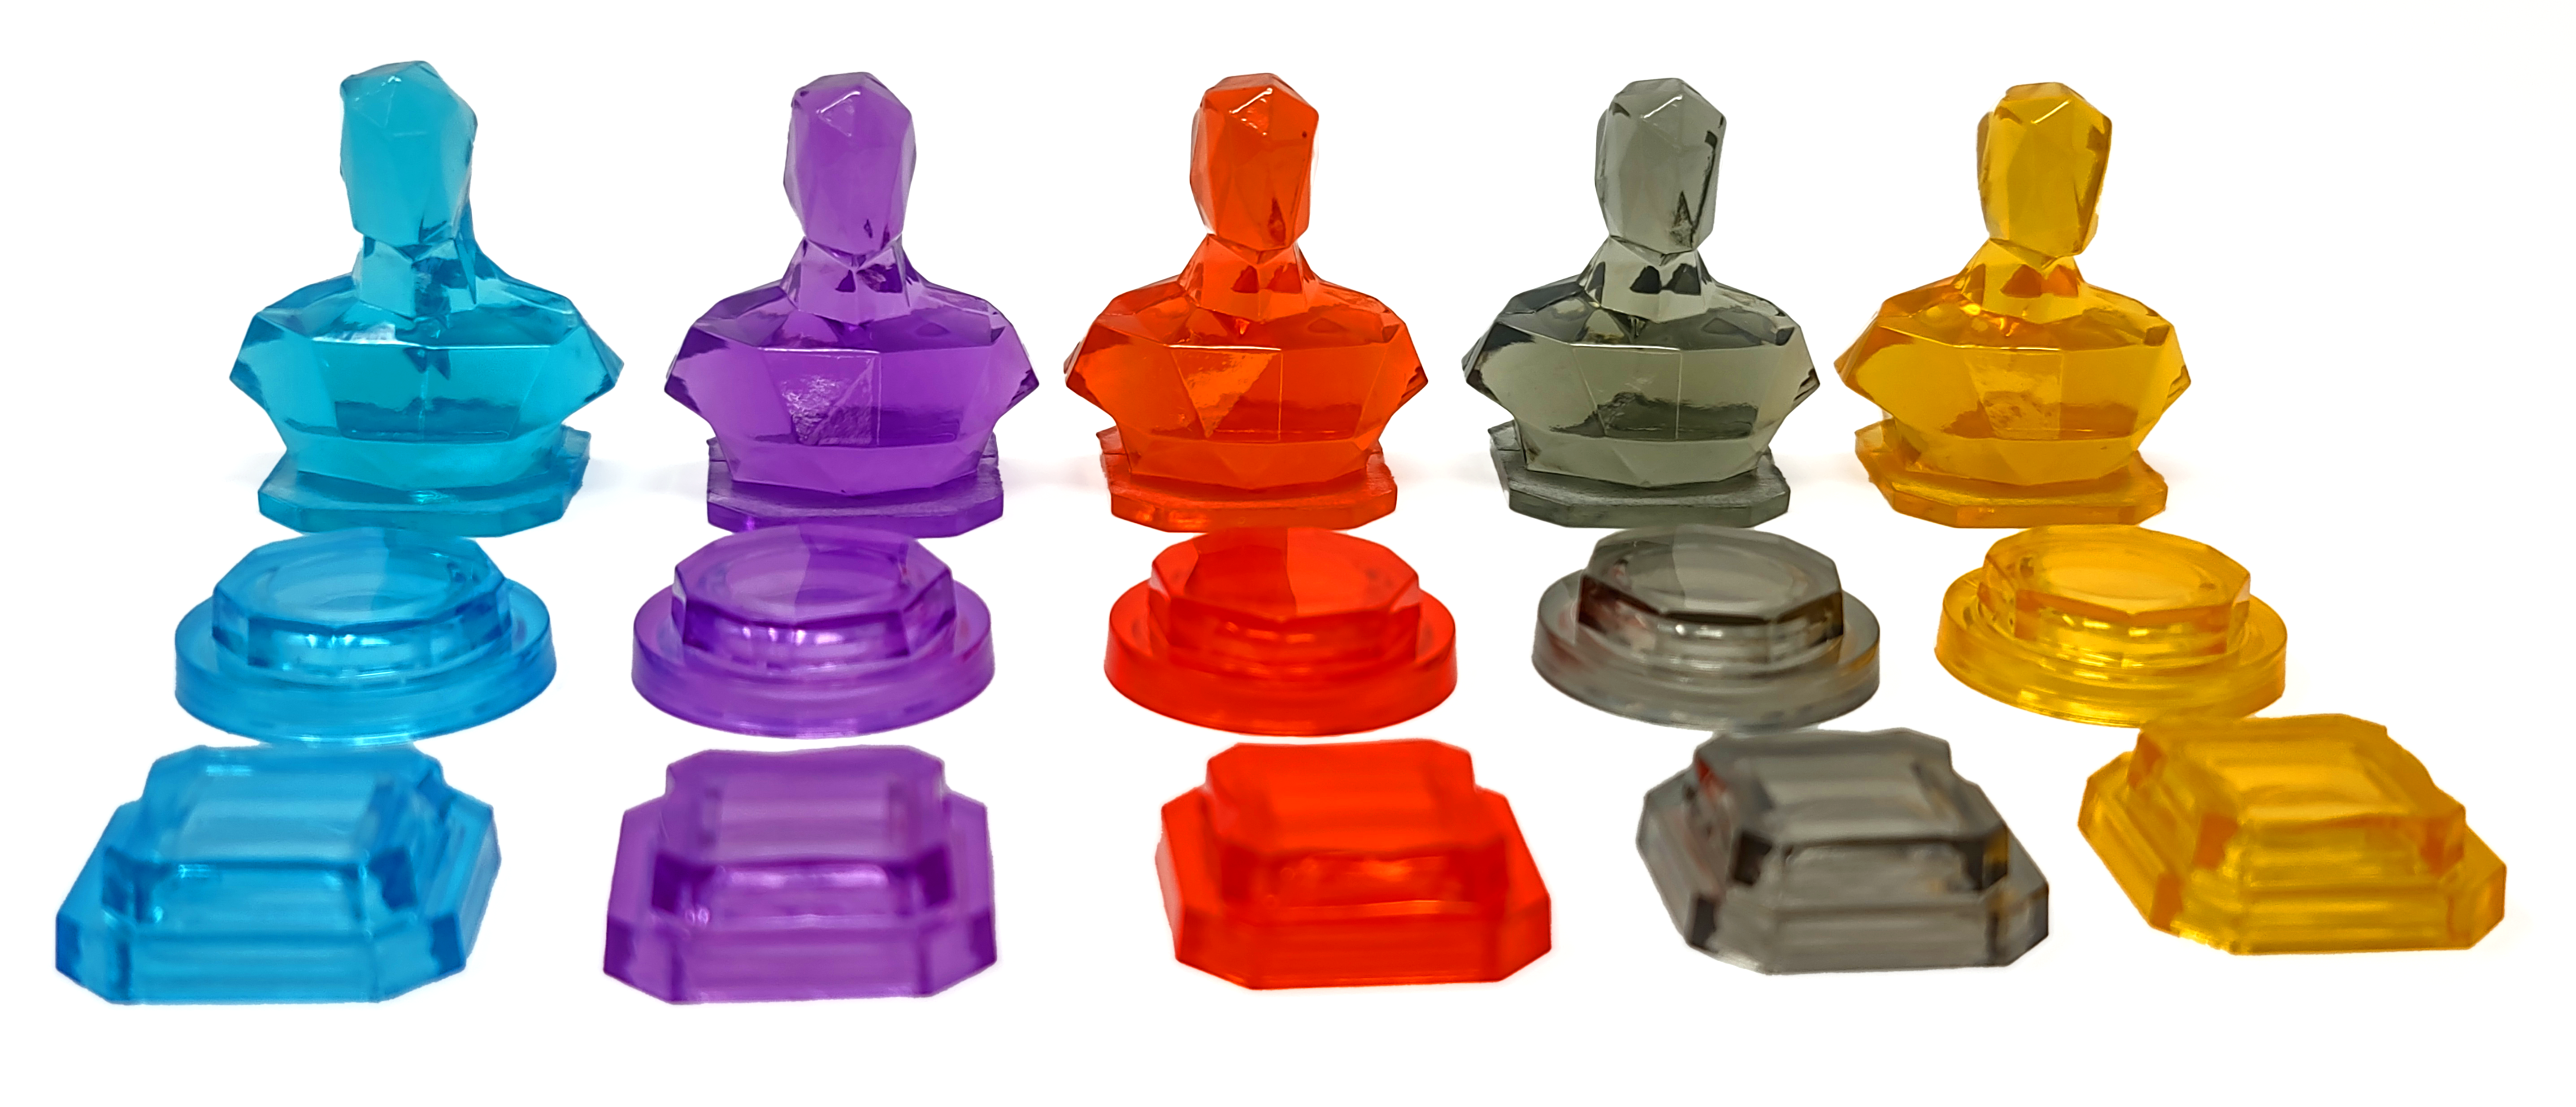 Metrorunner plastic player figures, geometric human busts and stackable tokens in translucent blue, purple, red, black, and yellow